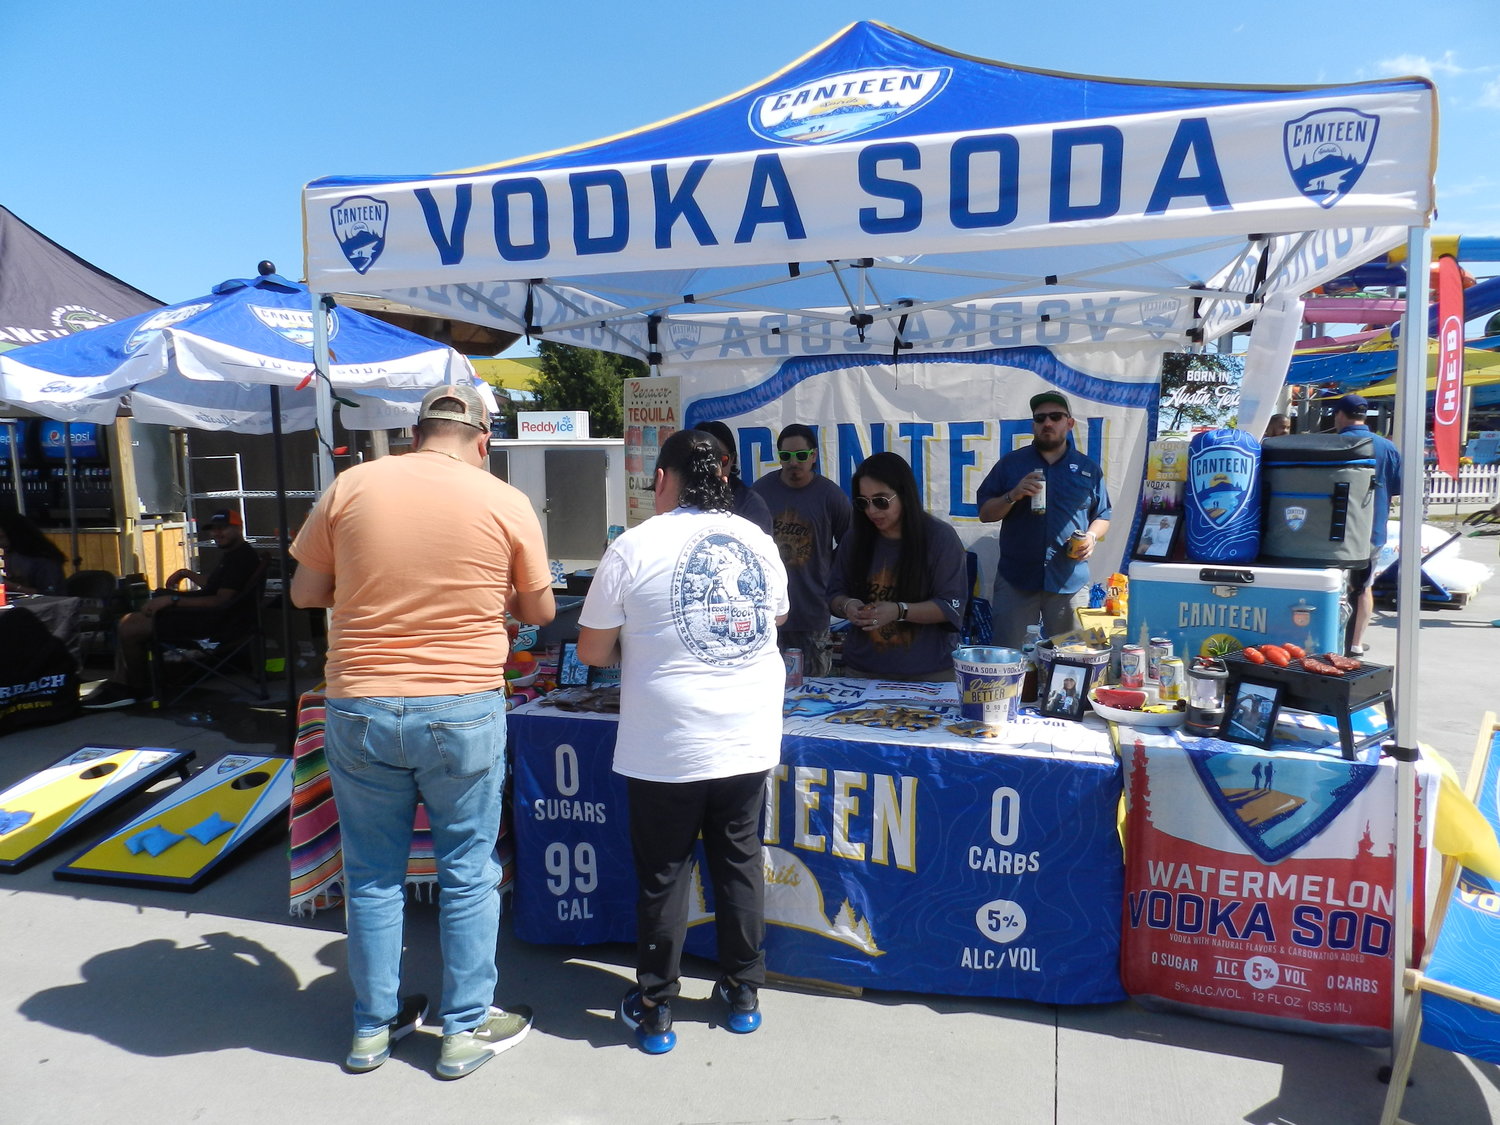 Vodka Soda was among the beverages featured at the brew fest. The Rotary Club of Katy distributes the proceeds from the brew fest to local communities in need.